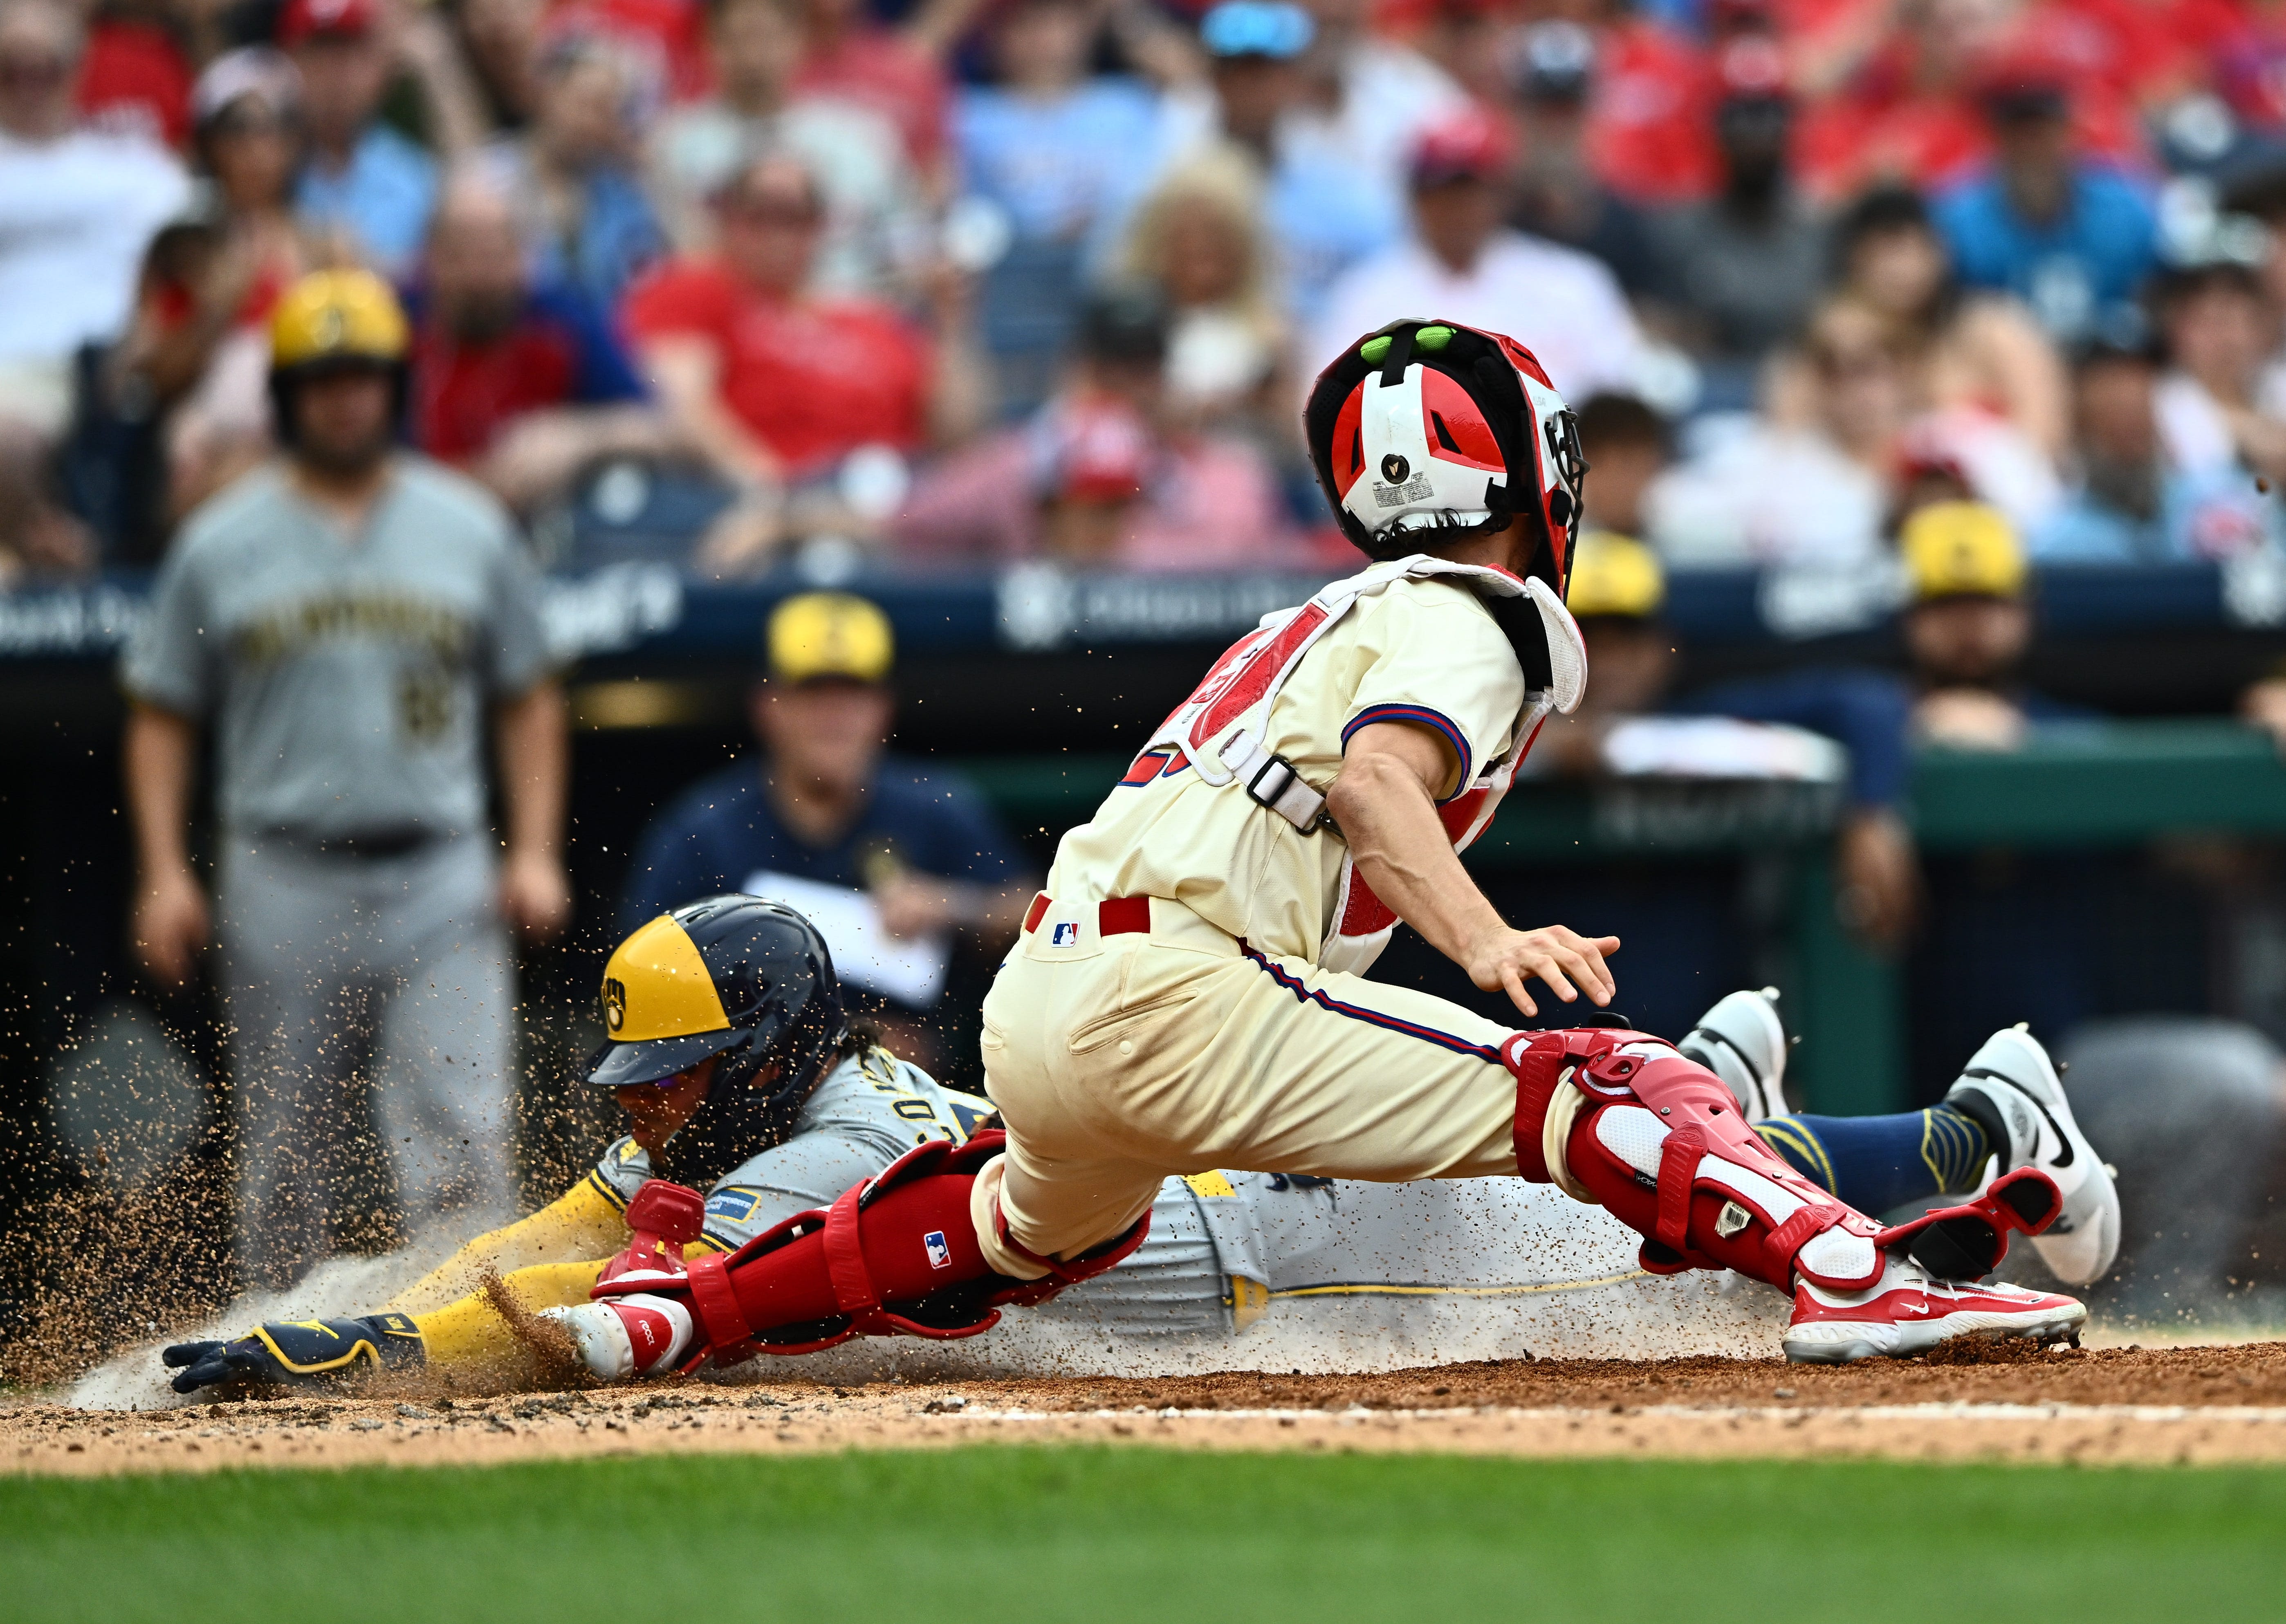 Sweep at the hands of the Phillies was disappointing but not devastating for the Brewers